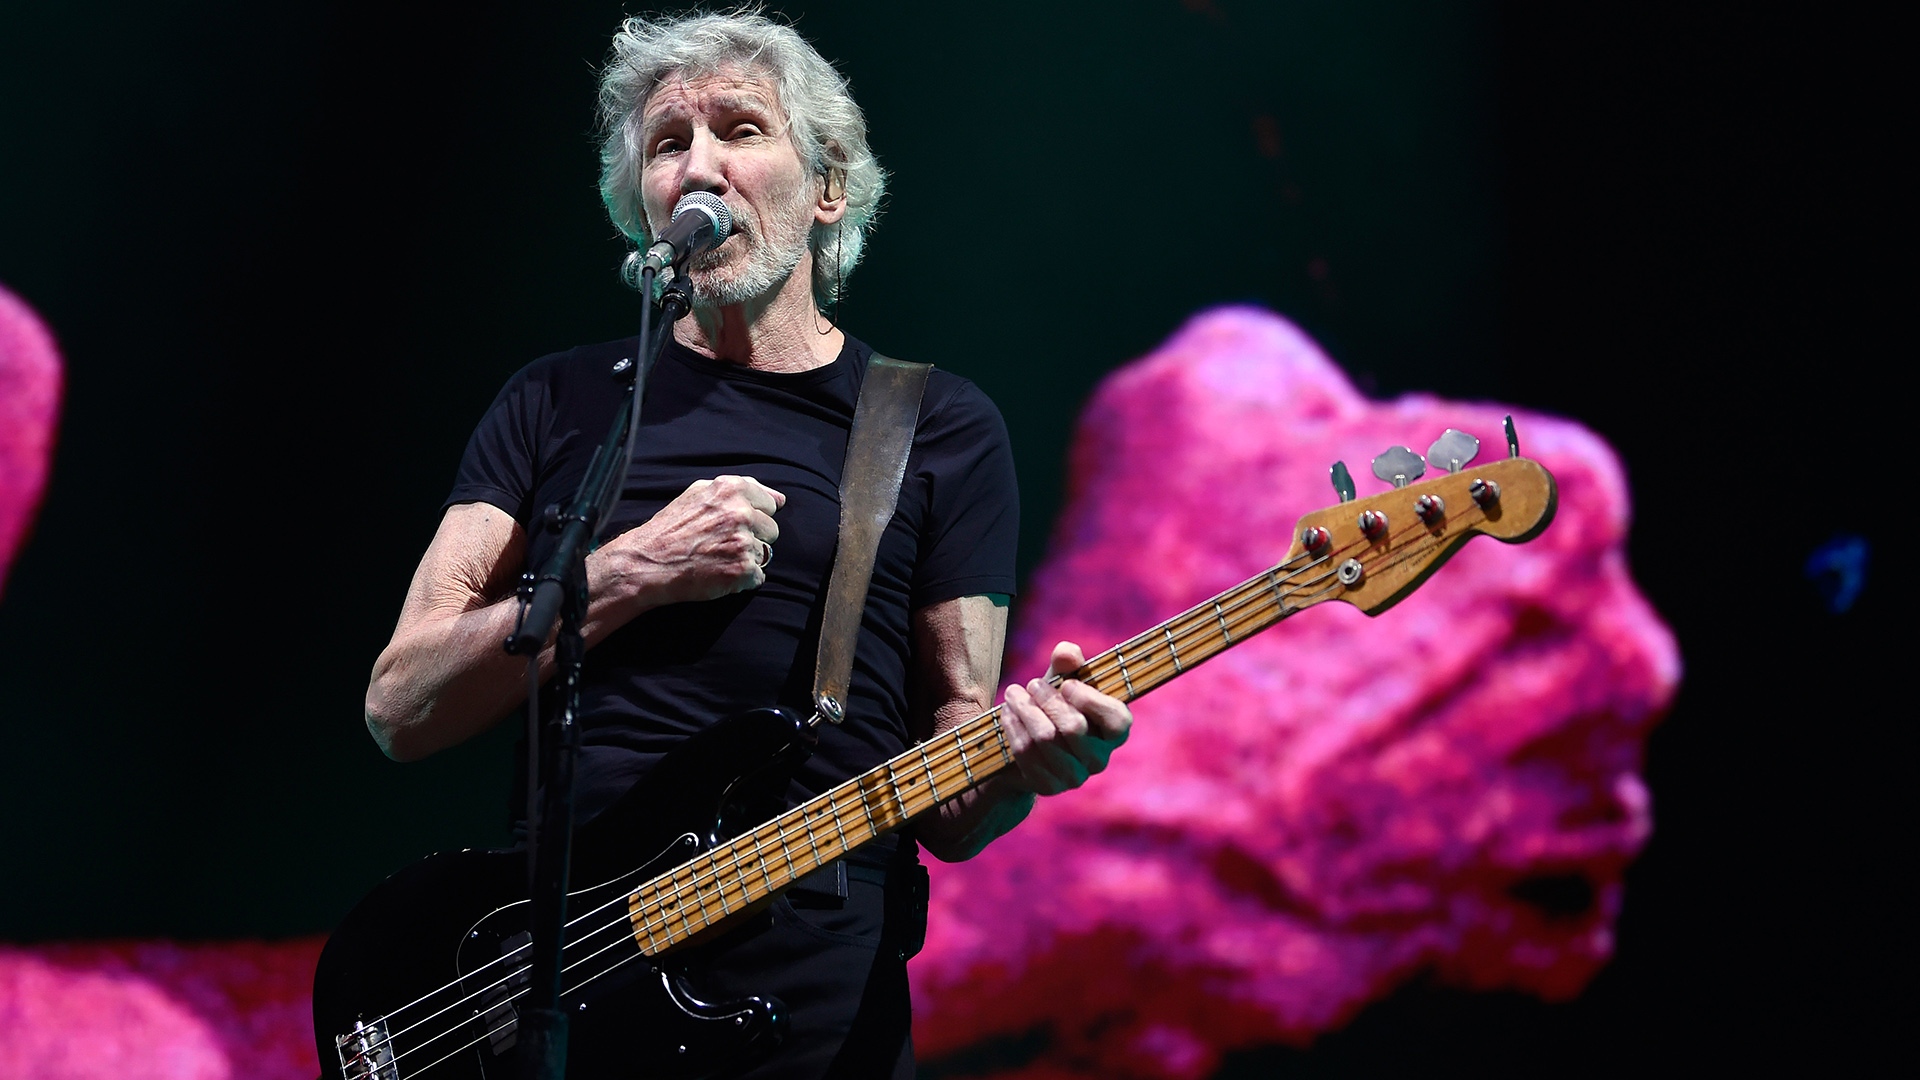 Roger Waters regresa a México con 'This Is Not a Drill' Tour